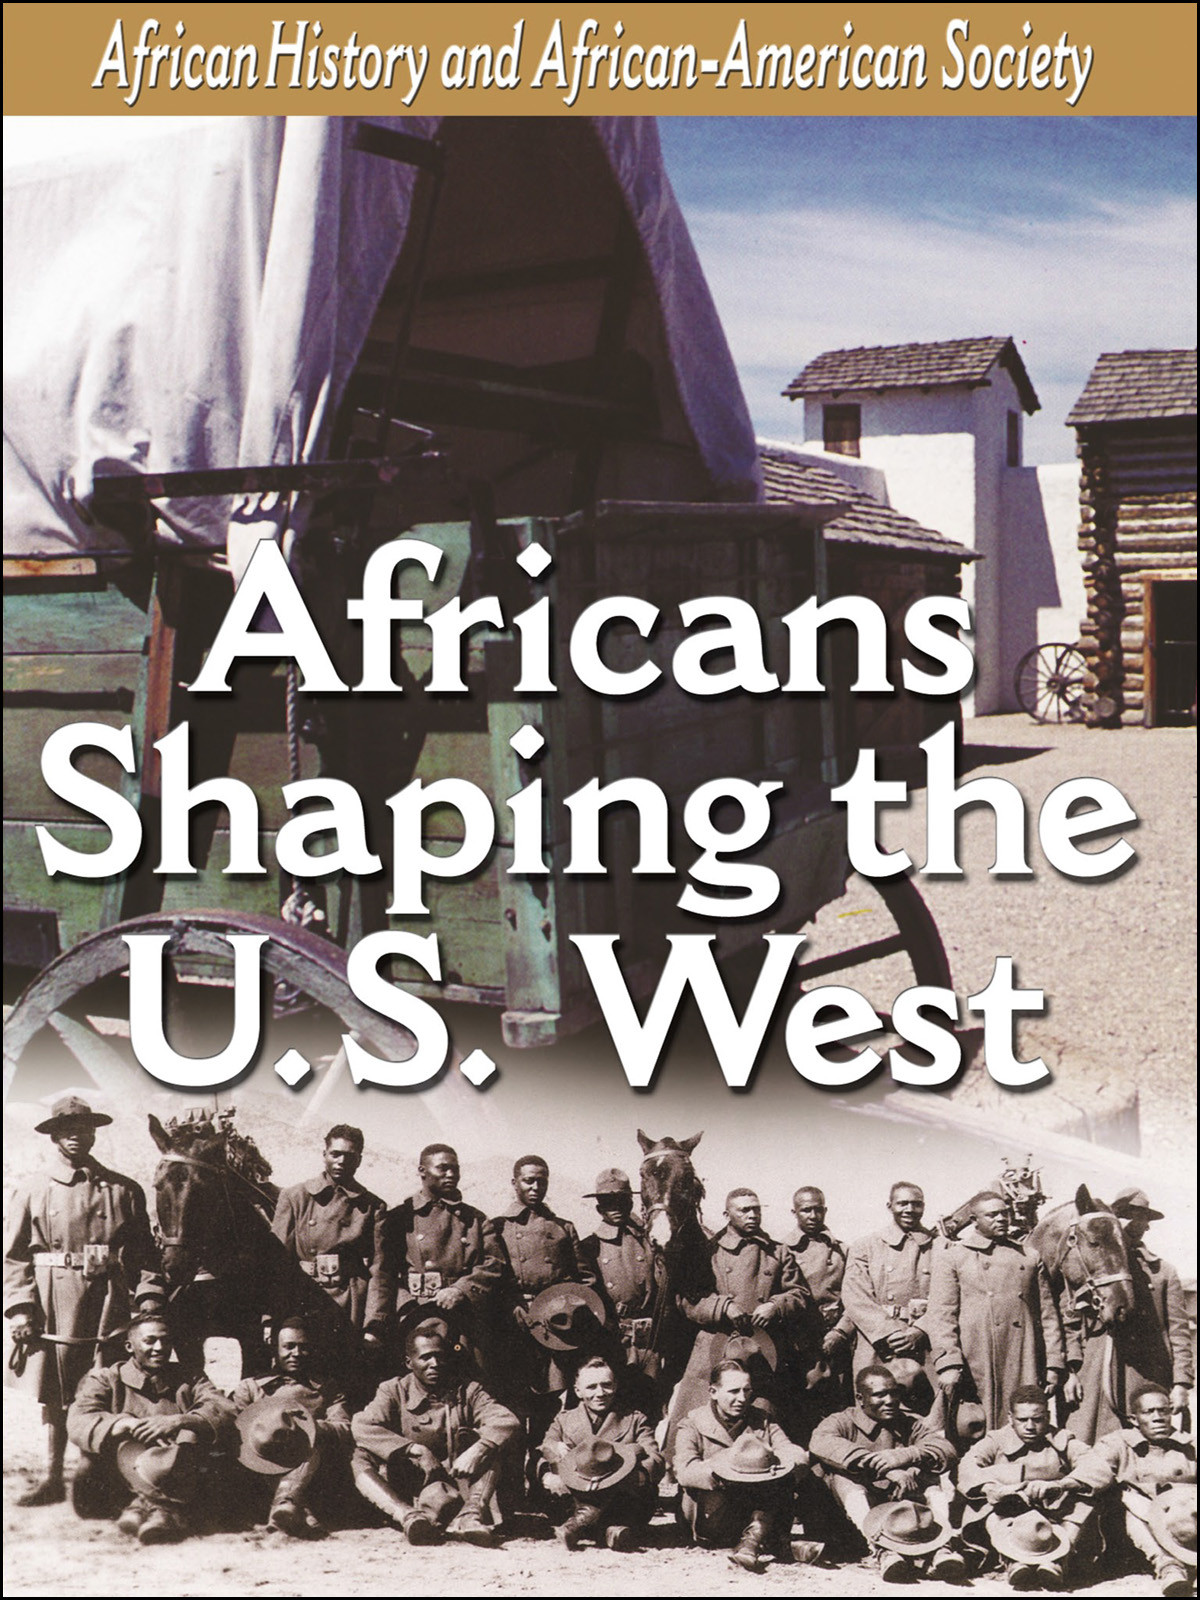 L906 - African-American History Africans Shaping the U.S. West